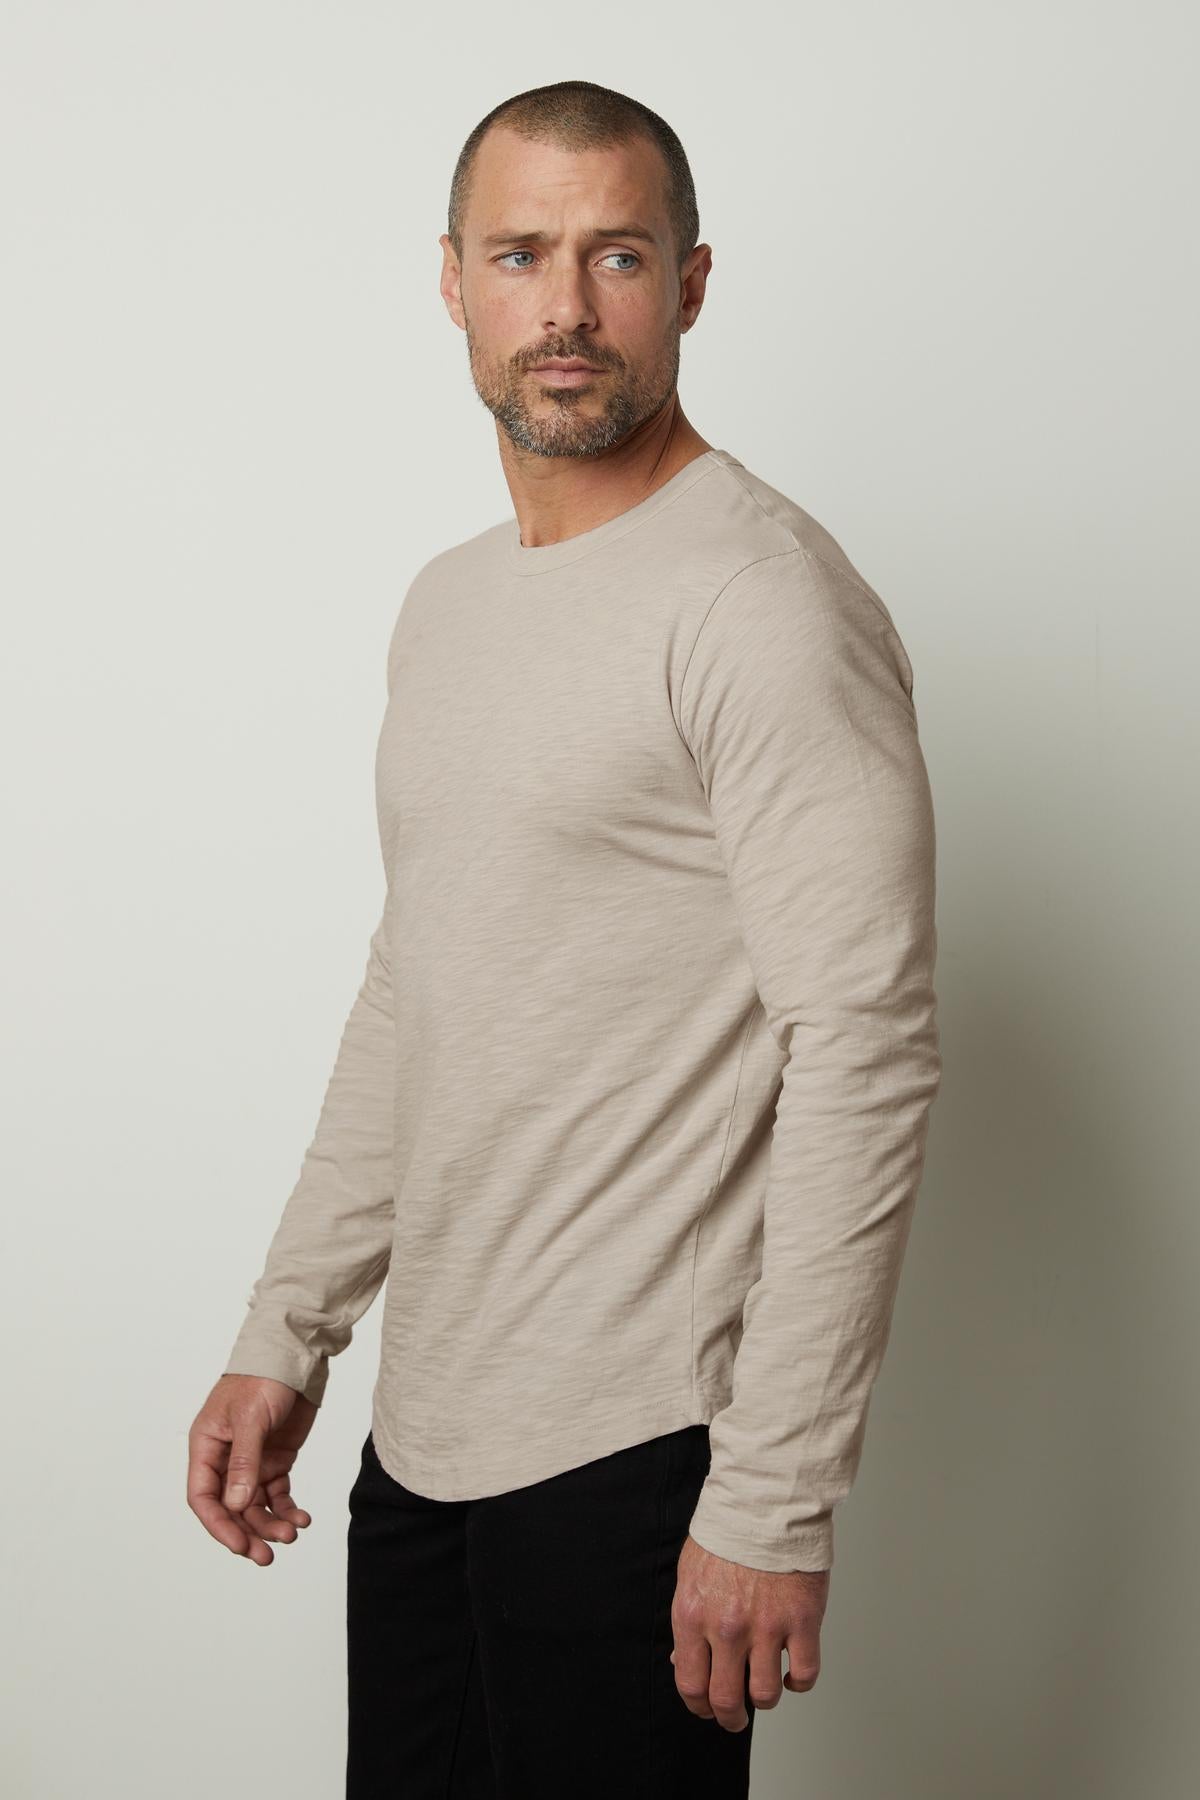 A man wearing a beige long sleeve KAI CREW NECK TEE by Velvet by Graham & Spencer, perfect for layering.-35776214597825